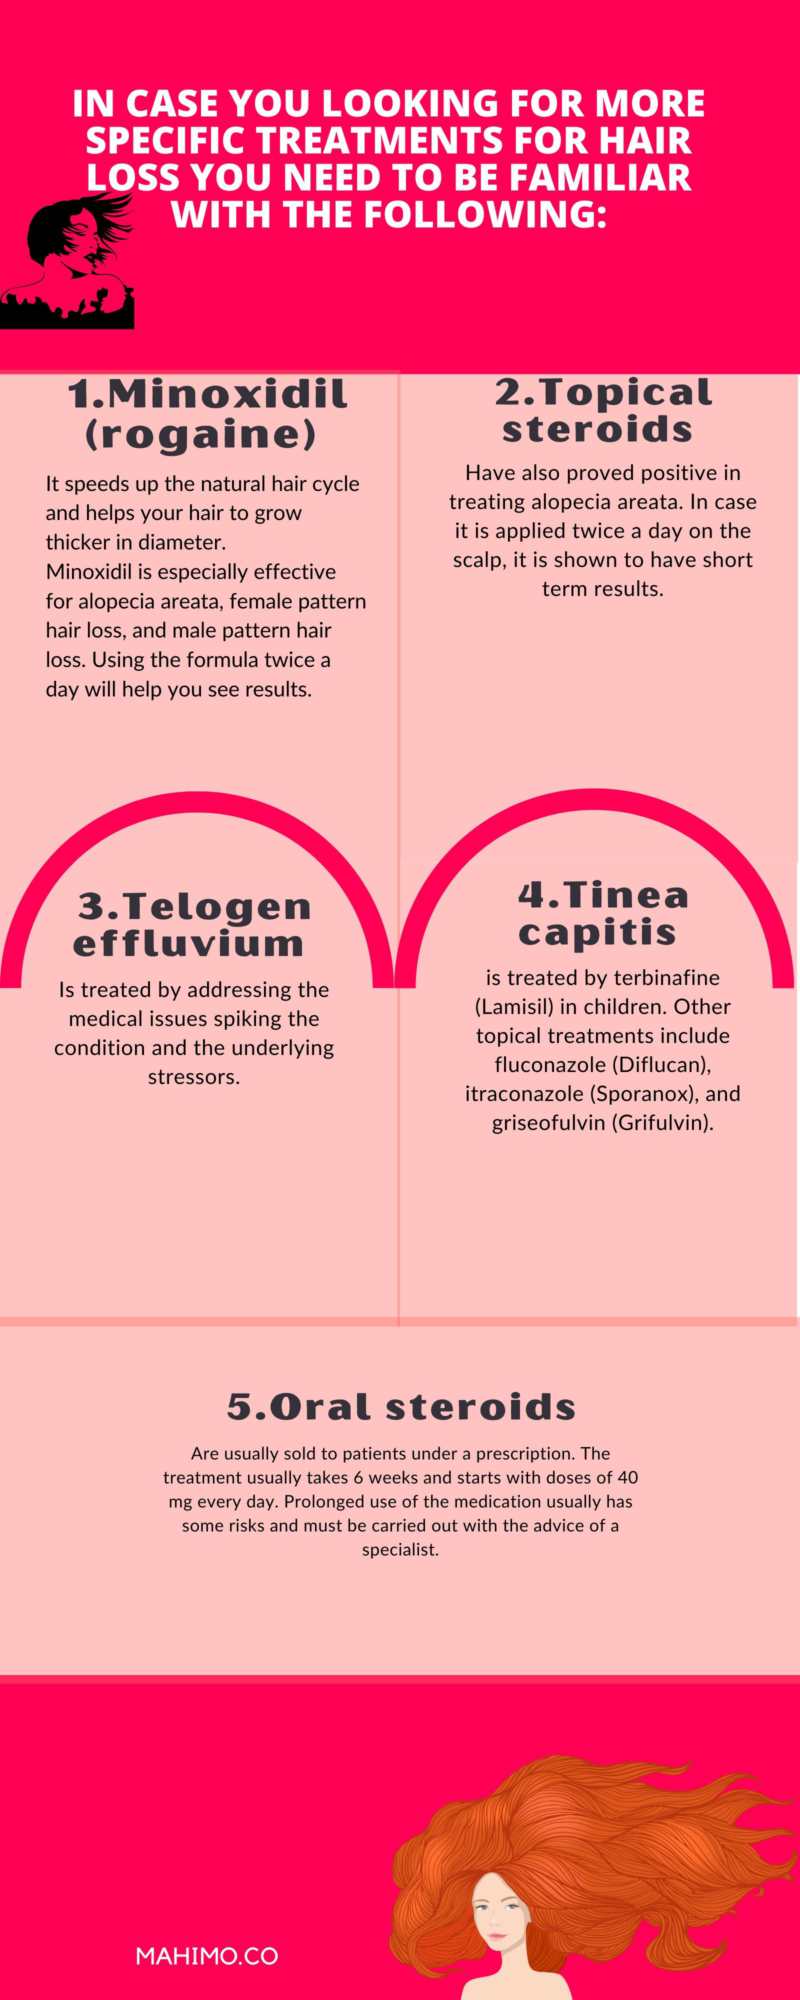 In case you looking for more specific treatments for hair loss you need to be familiar with the following: